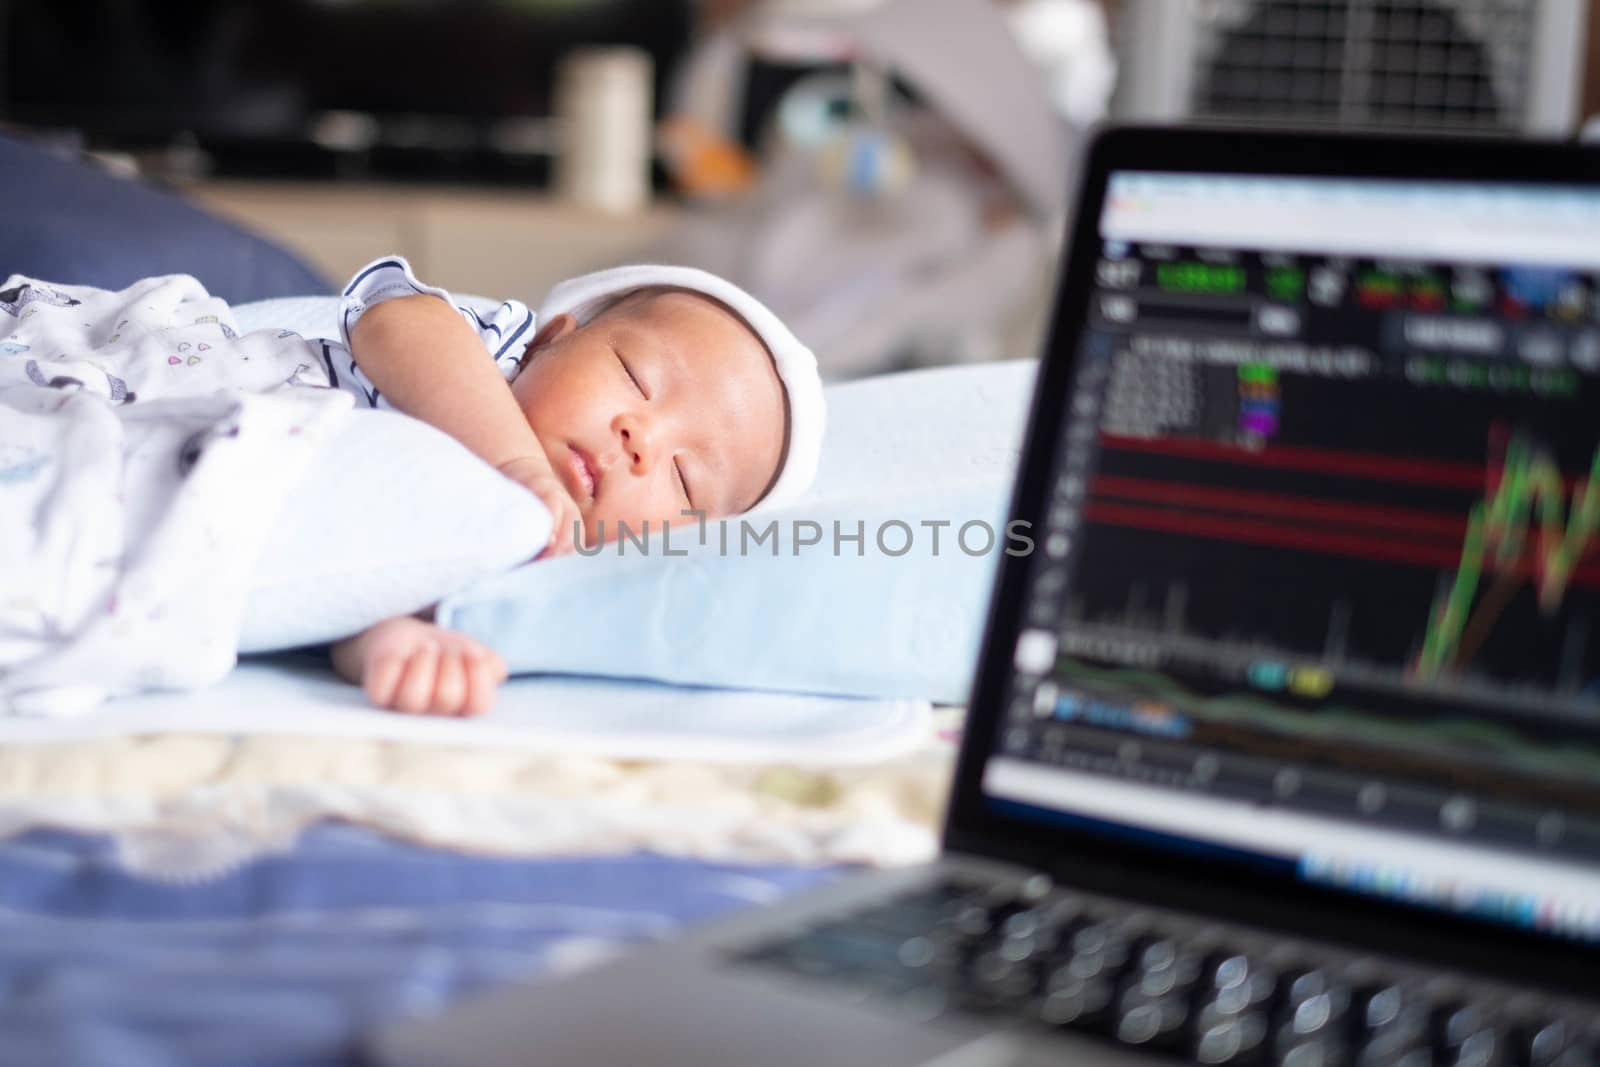 Soft focus on baby .The parents father Stock trader trading stock on his laptop while his newborn infant baby sleep on the bed